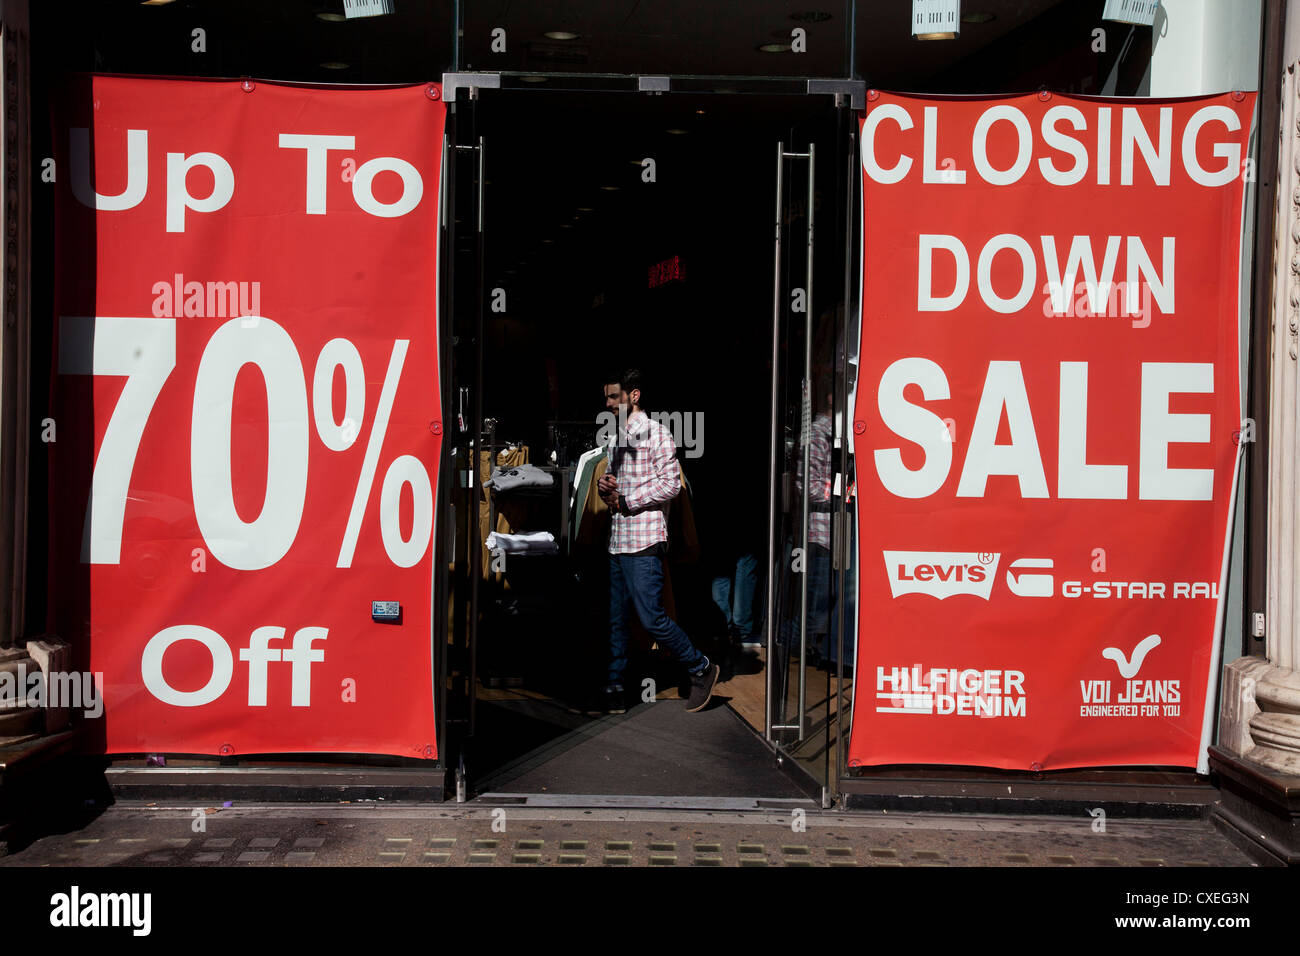 Closing Down Sale signs of a retail shop in central London, UK. Due to the economic downturn, many shops are closing. Stock Photo